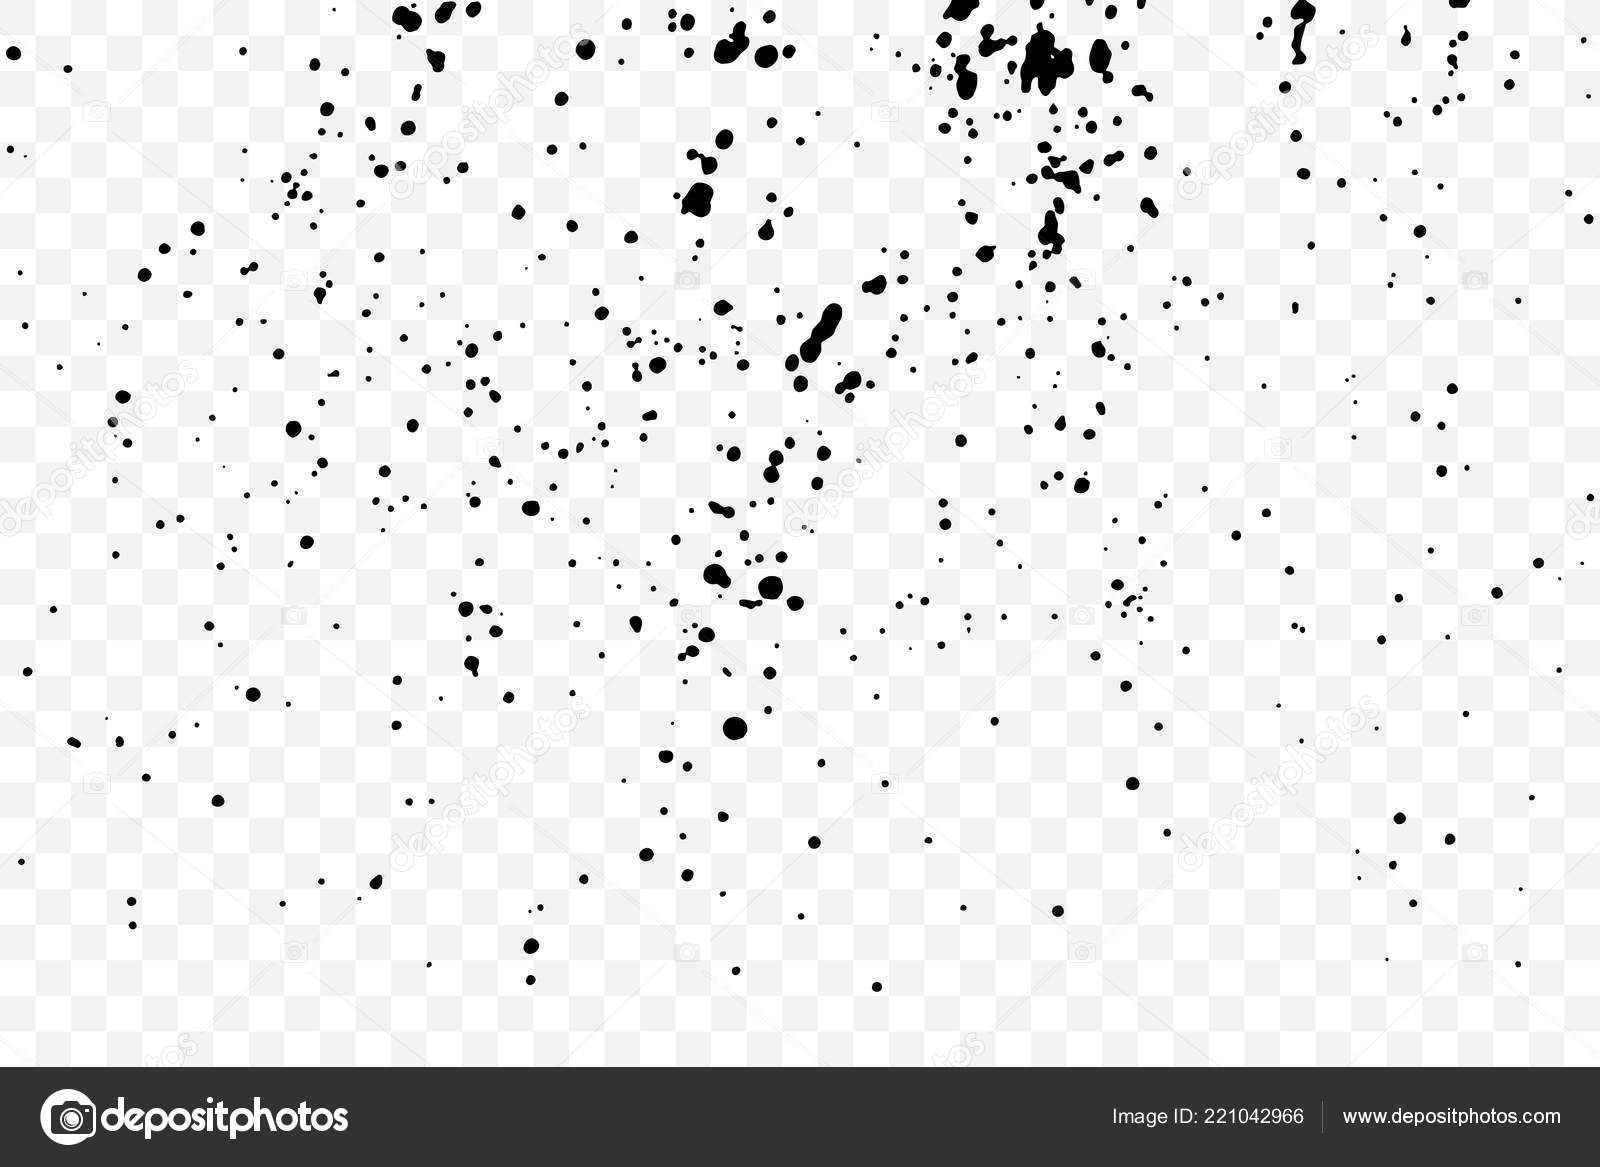 Grainy Grunge Abstract Texture Transparent Paint Spray Drop Black Ink Vector Image By C Goldenshrimp Vector Stock